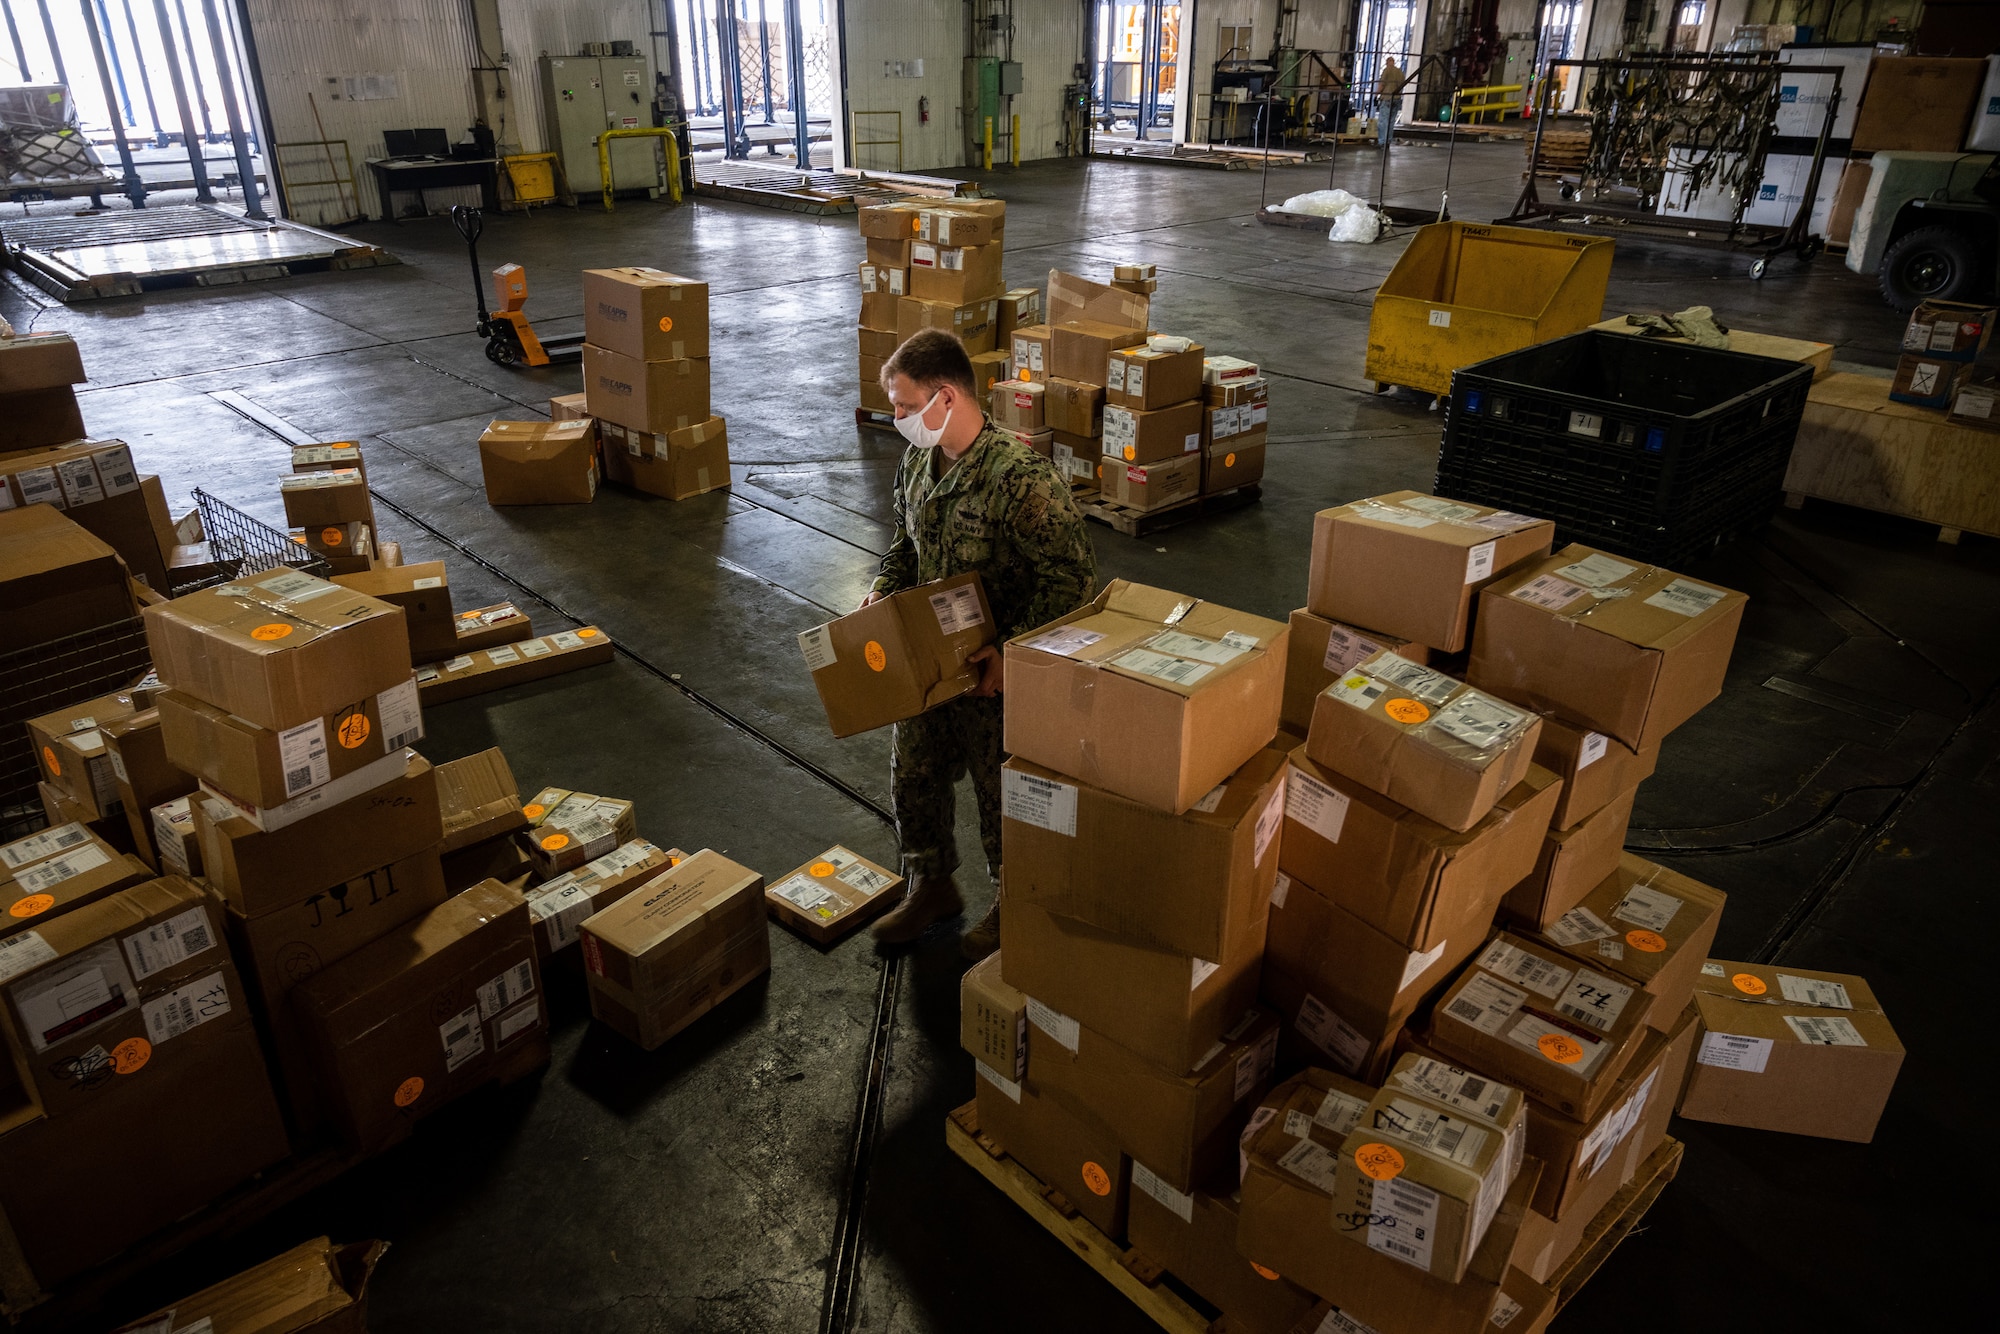 A Navy service member stacks boxes inside a large warehouse.